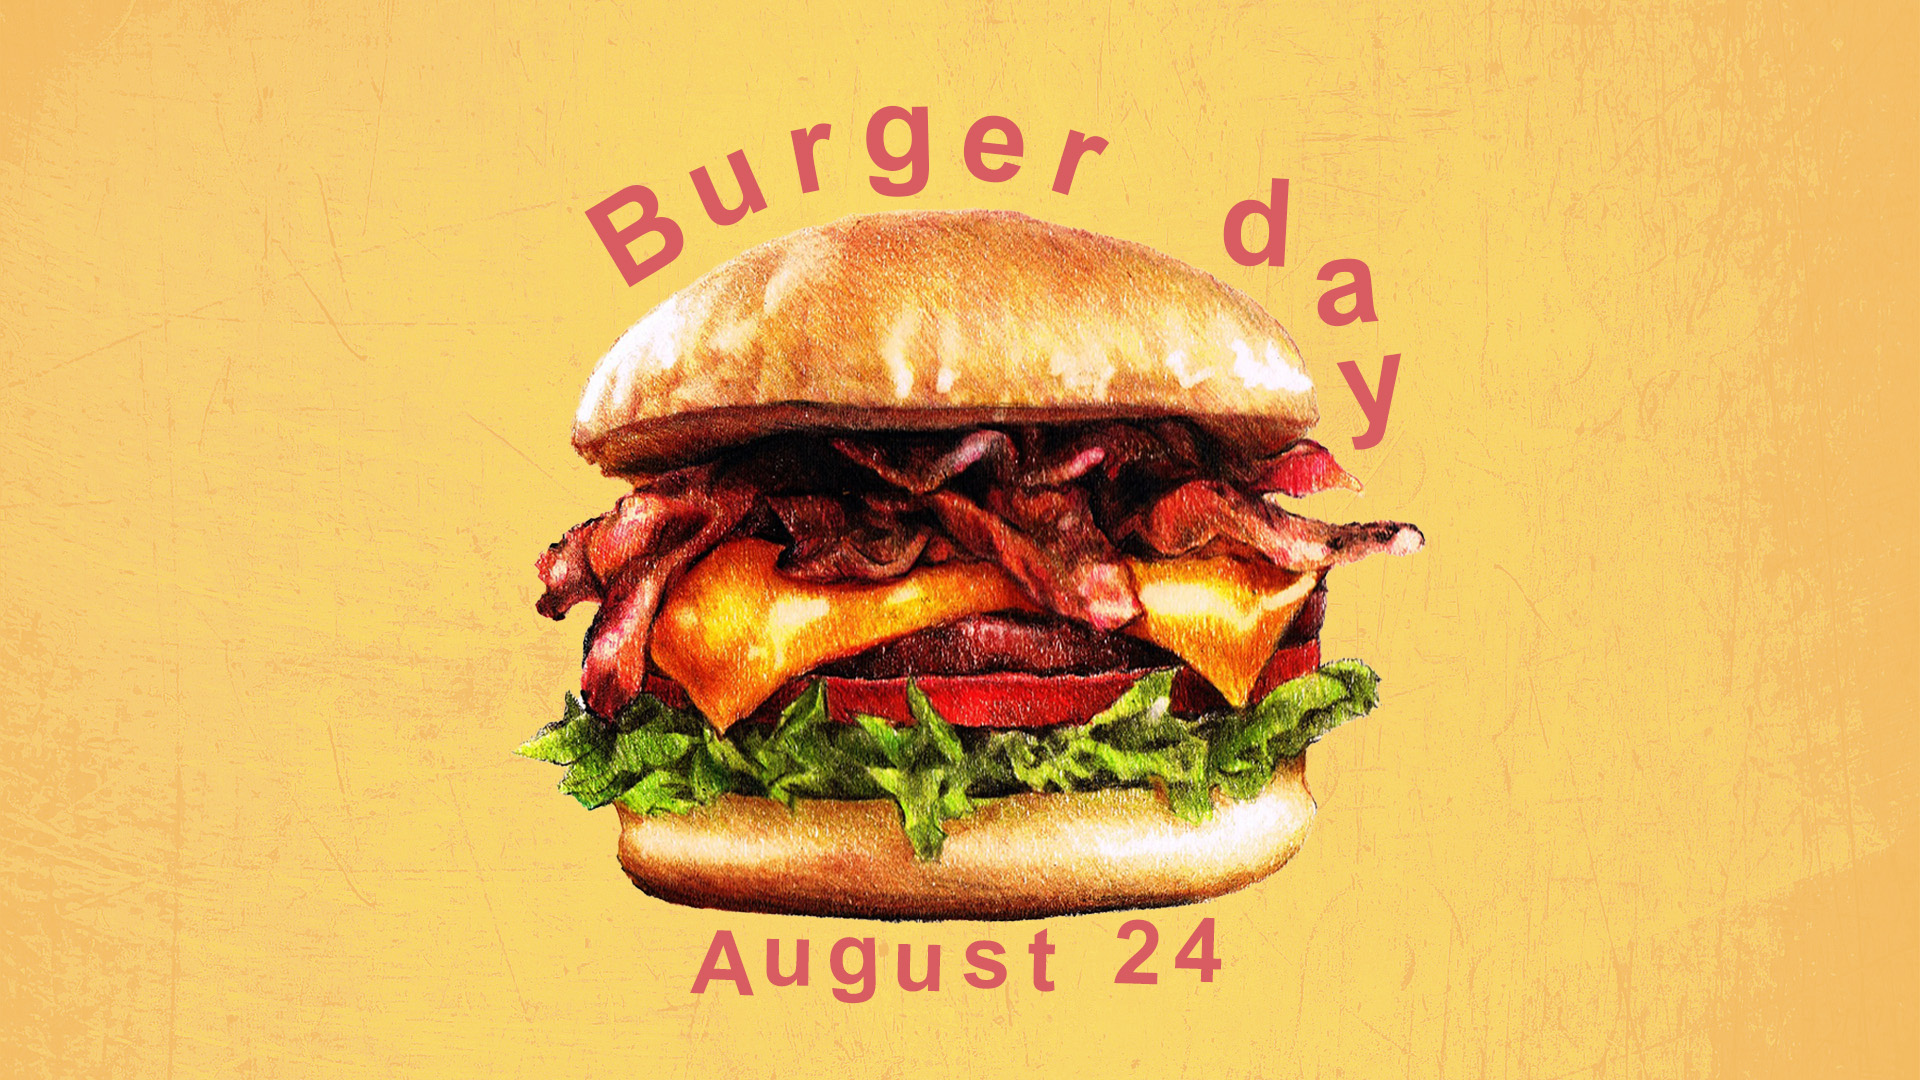 Background is a sketched yellow grungy texture. There is a color penciled sketch of a burger in the middle of the image. Burger Day is in a reddish colored simple font bouncing across the top if the bun. August 24 is bouncing below the burger across the bottom bun.